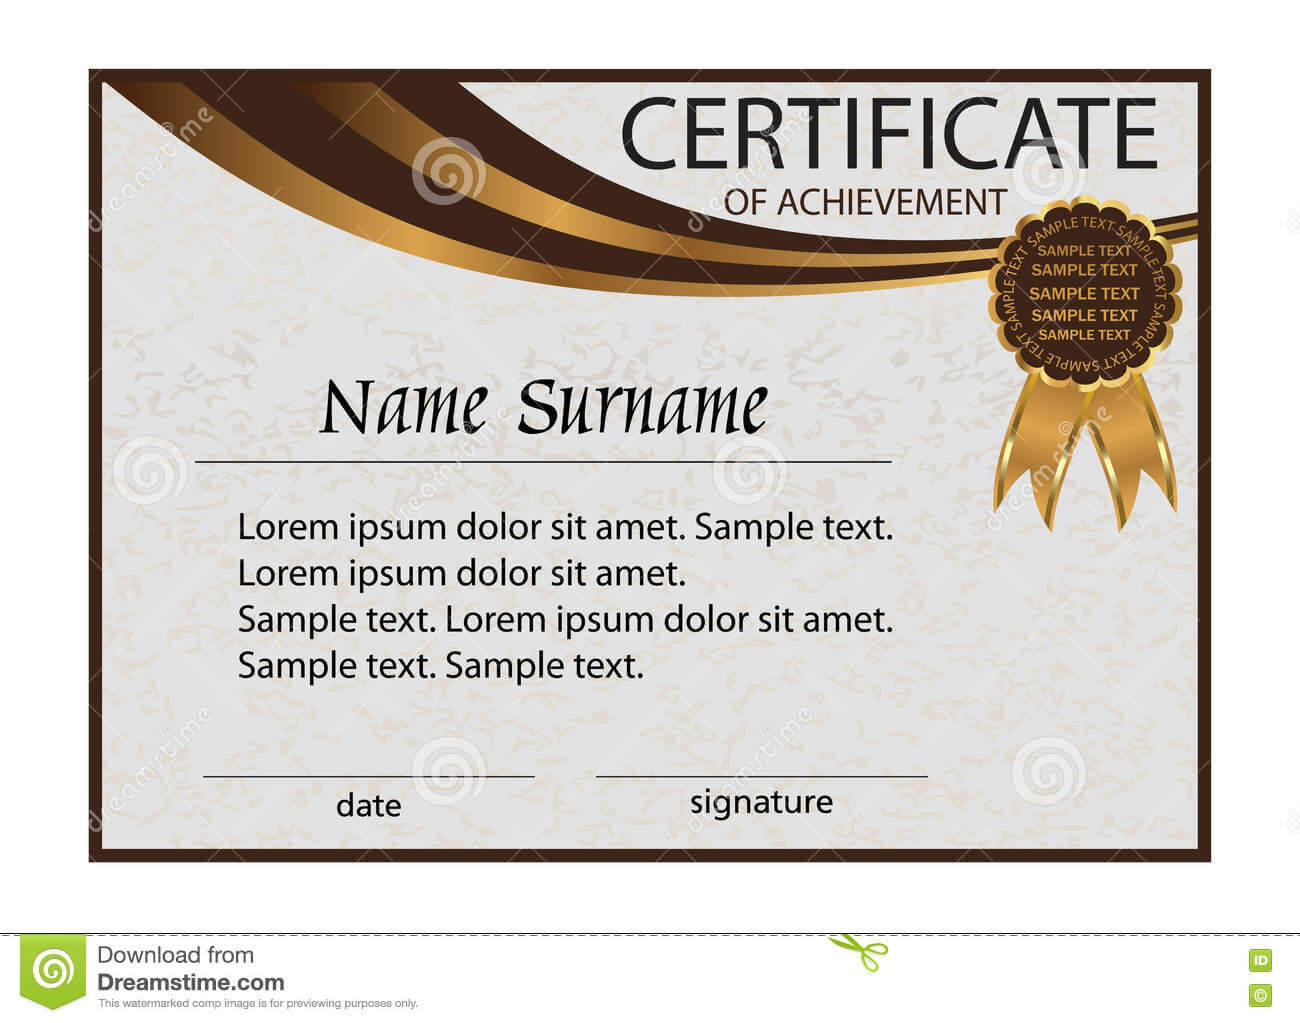 Certificate Of Achievement Or Diploma. Elegant Light In Certificate Of Attainment Template